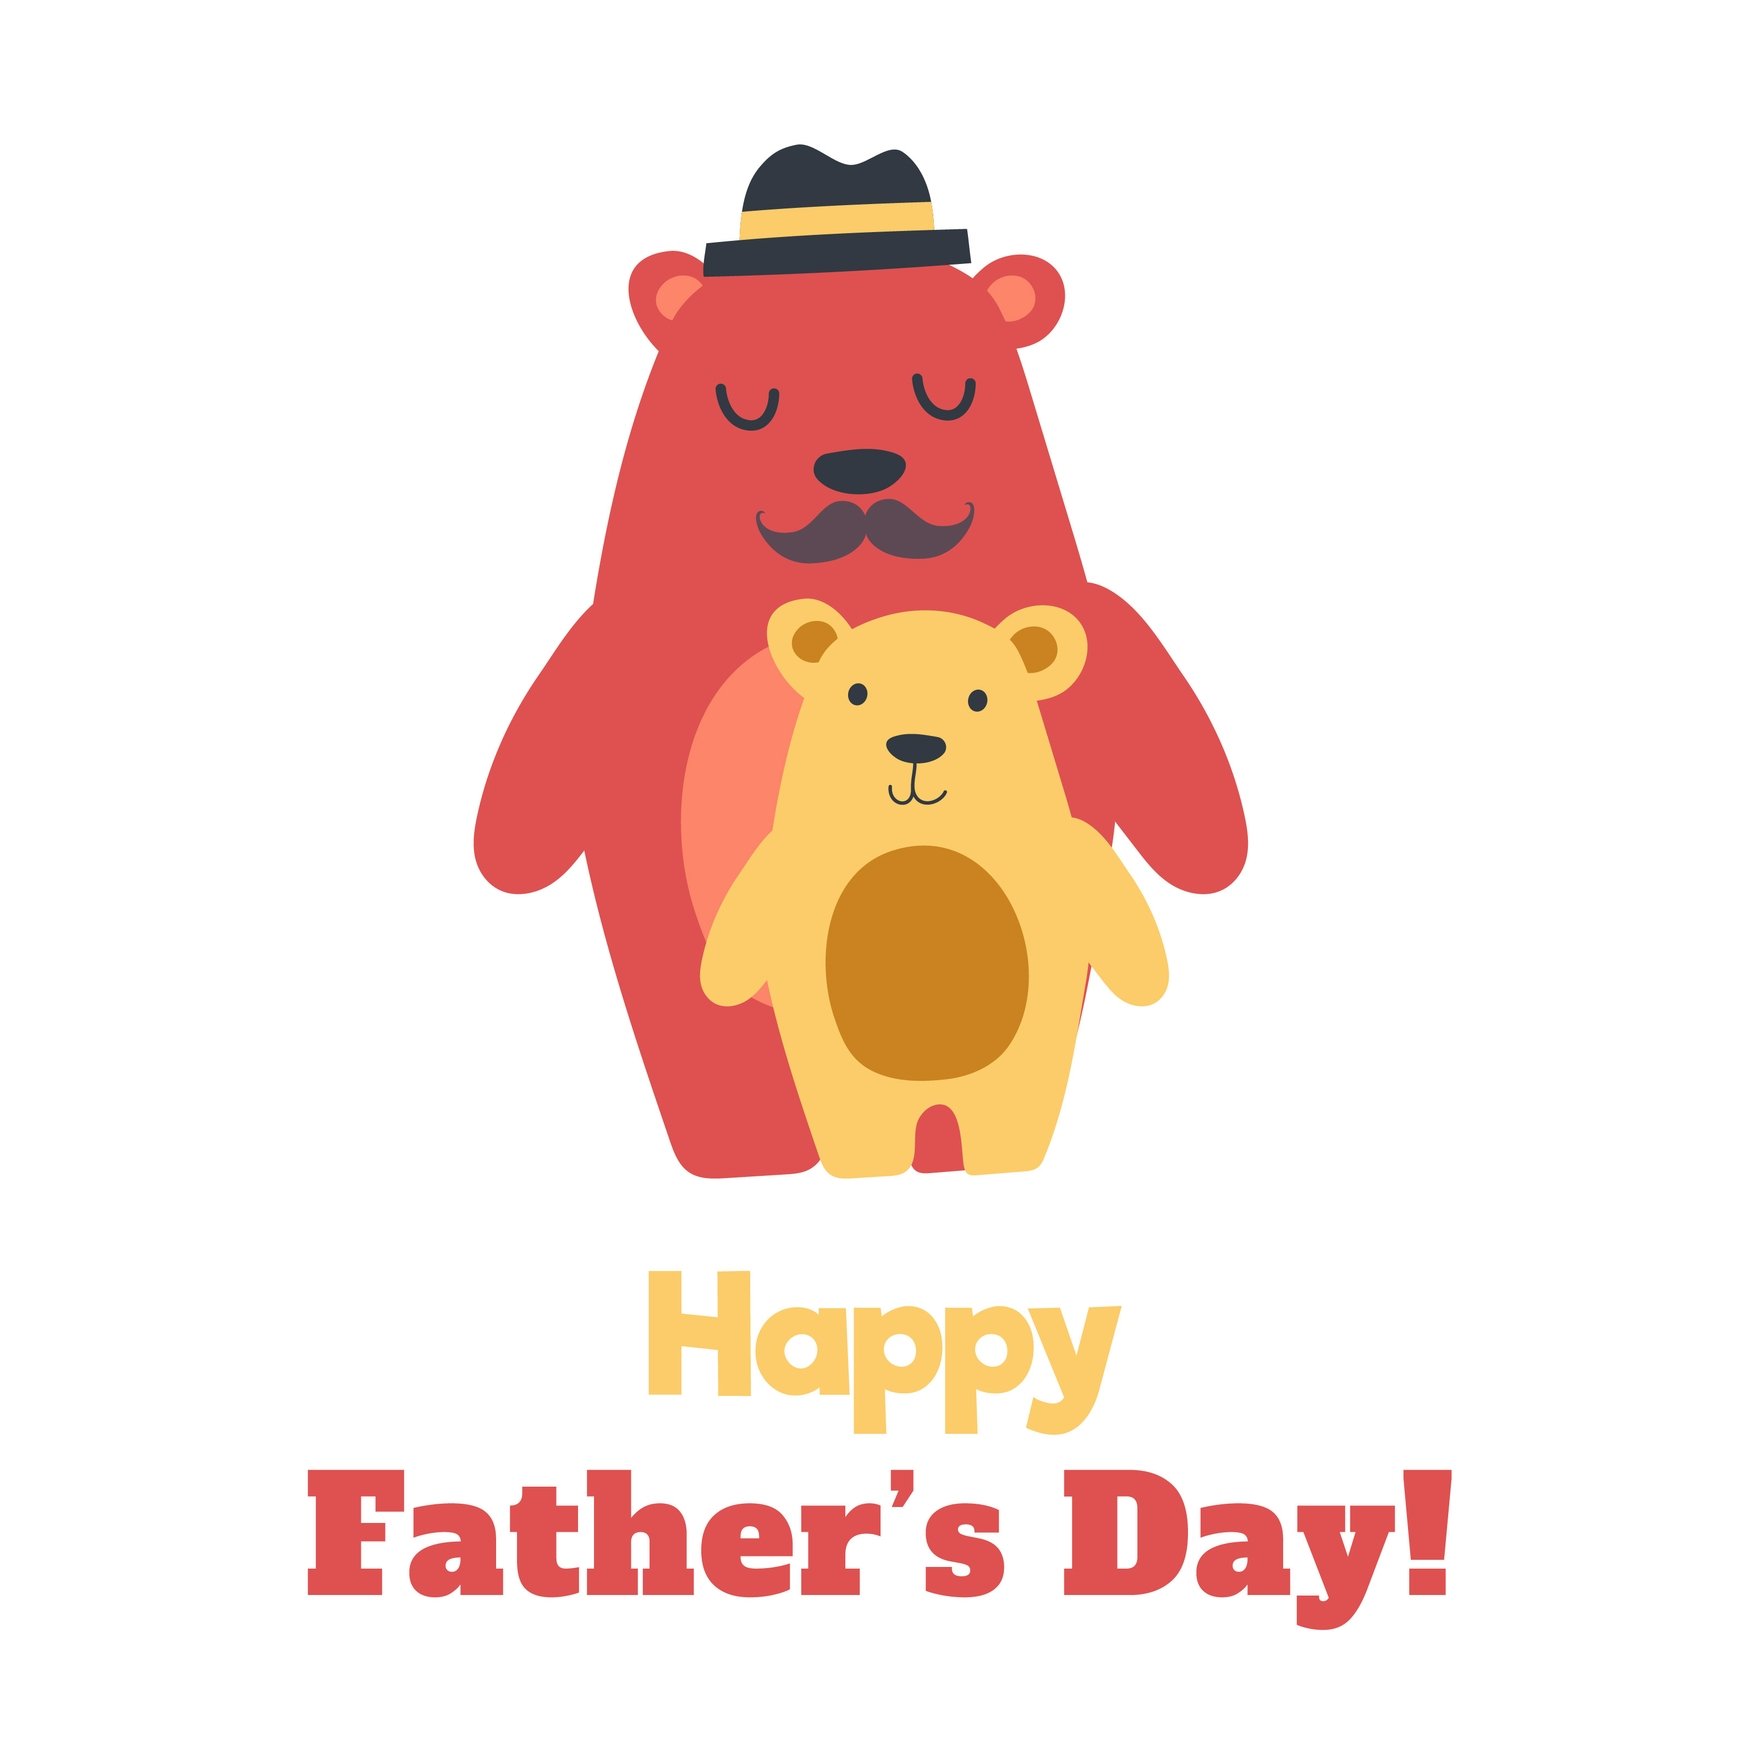 Free Cute Happy Father's Day Gif in Illustrator, EPS, SVG, JPG, GIF, PNG, After Effects